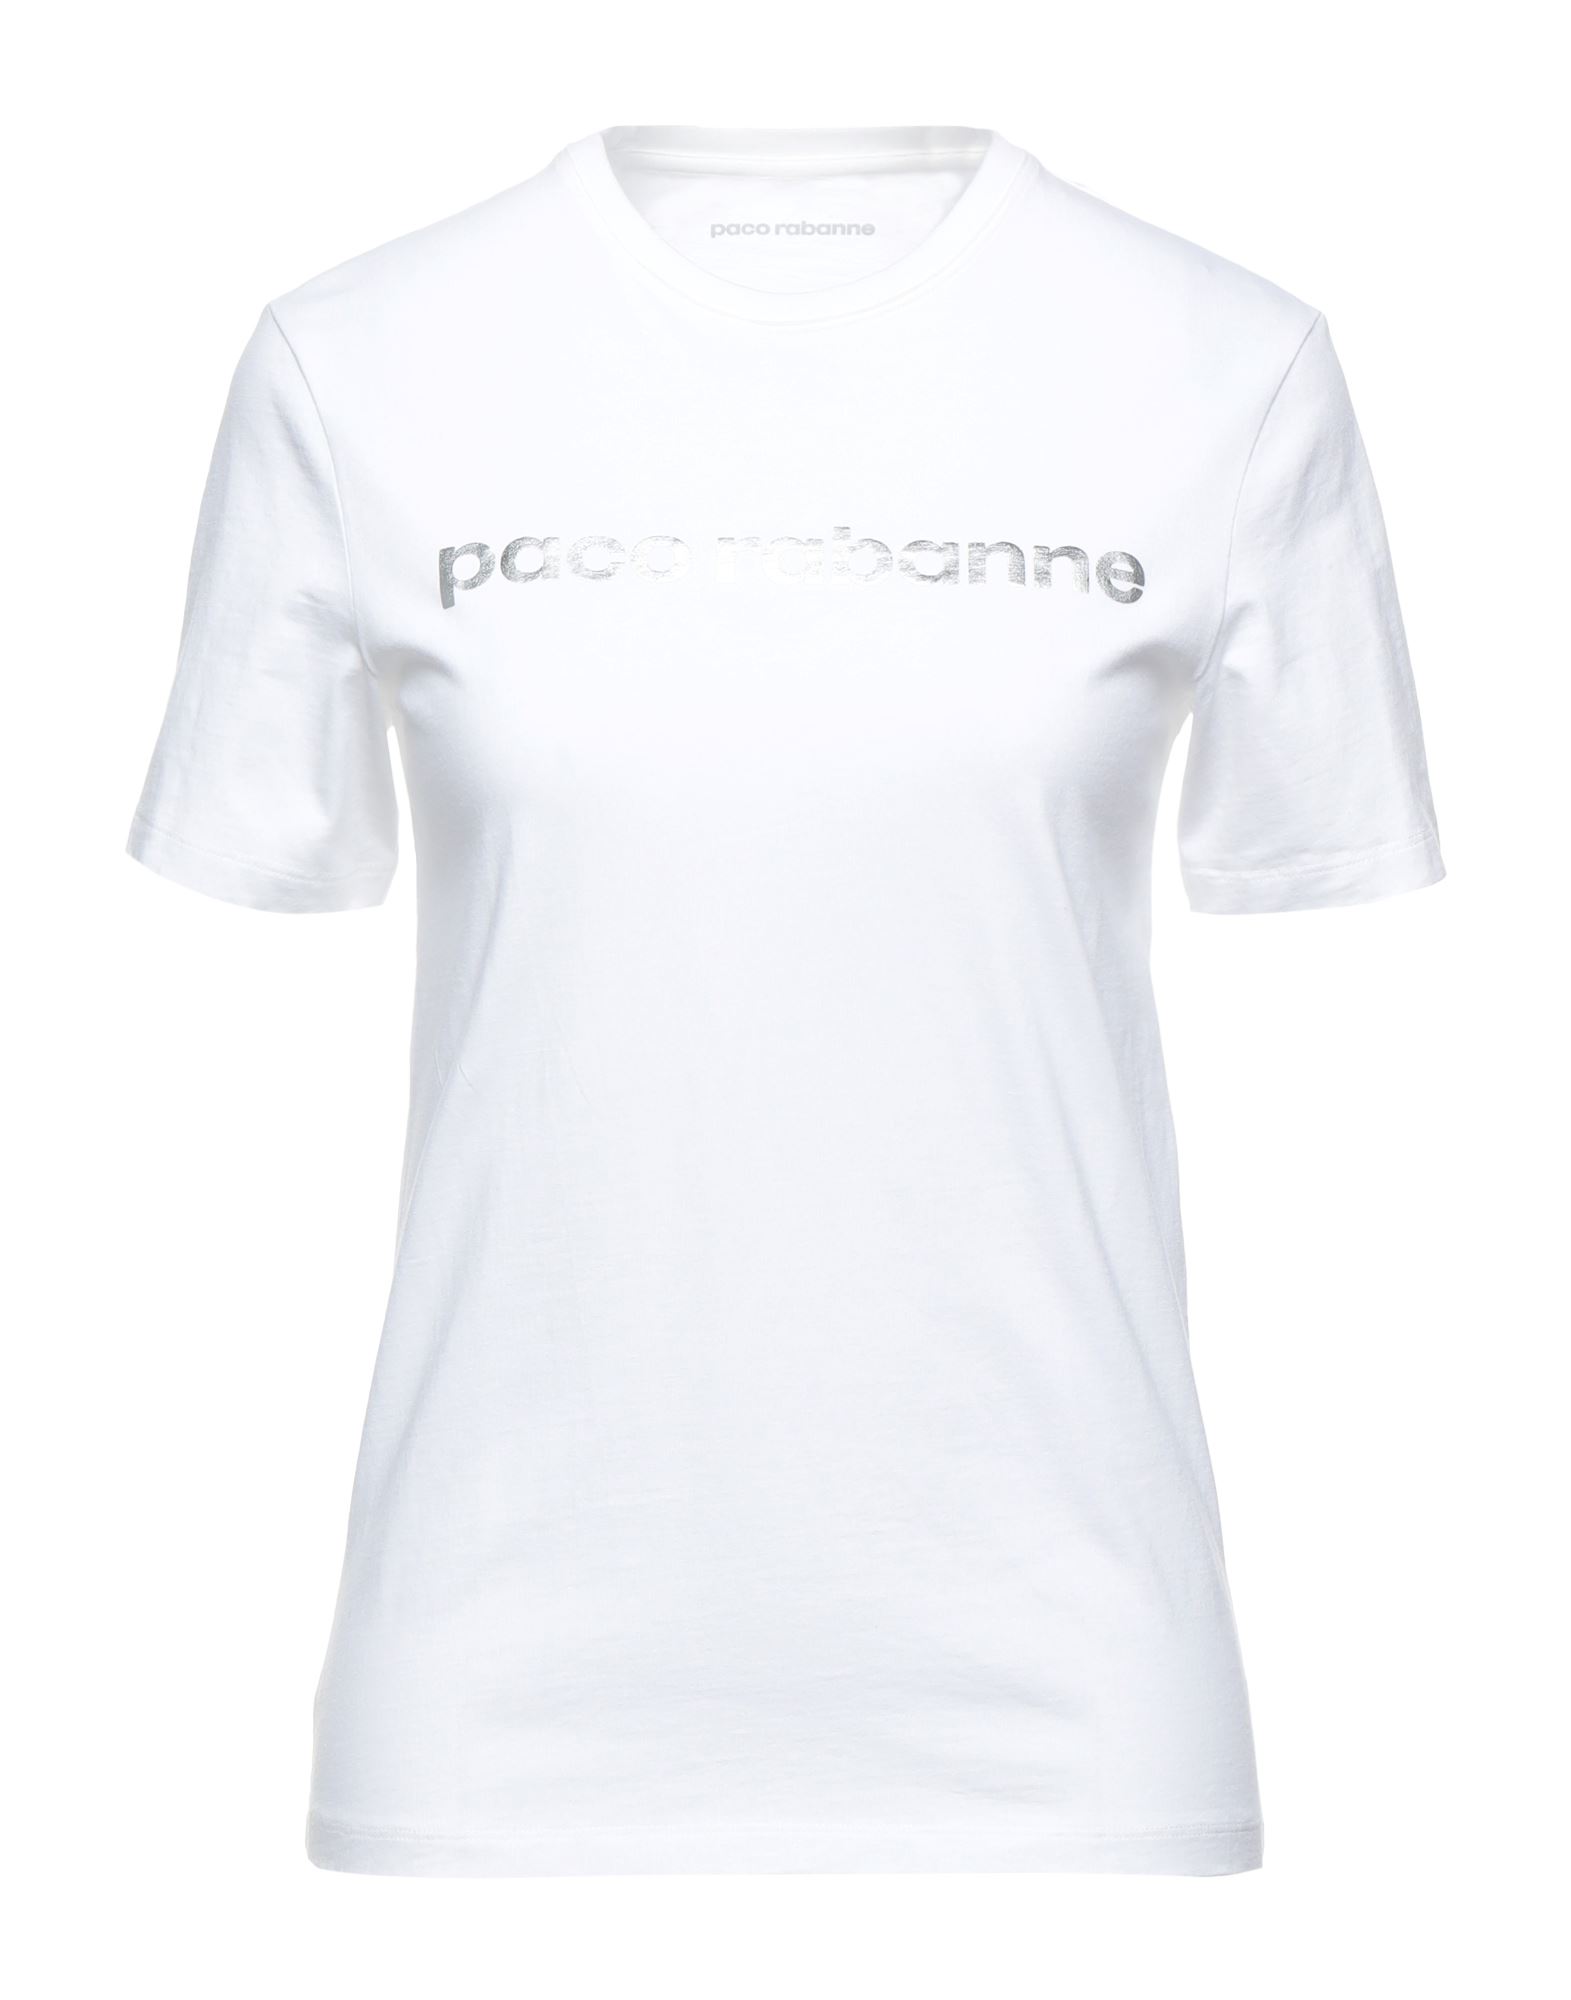 Paco Rabanne T-shirts In White